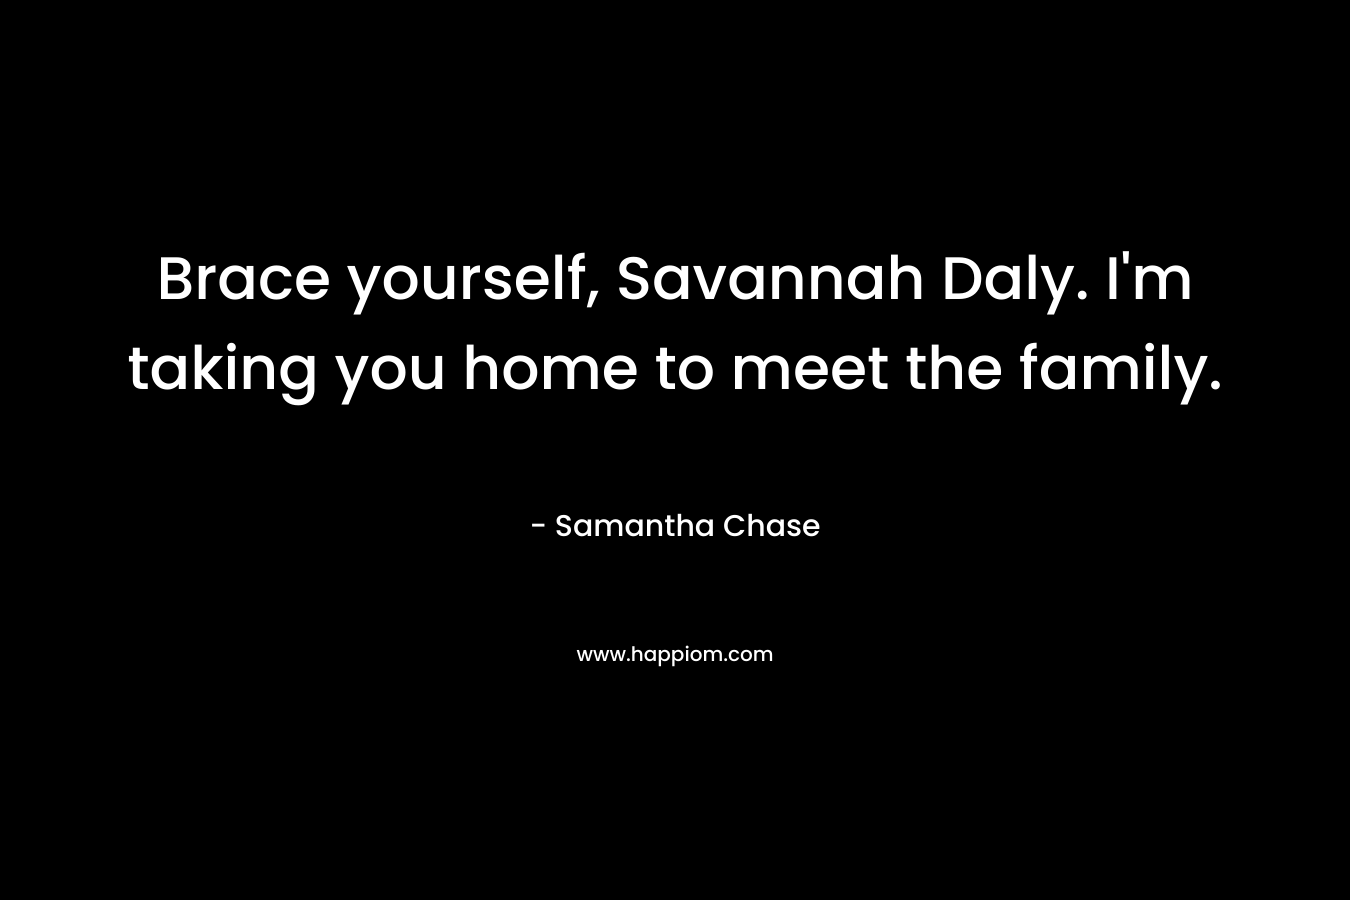 Brace yourself, Savannah Daly. I'm taking you home to meet the family.